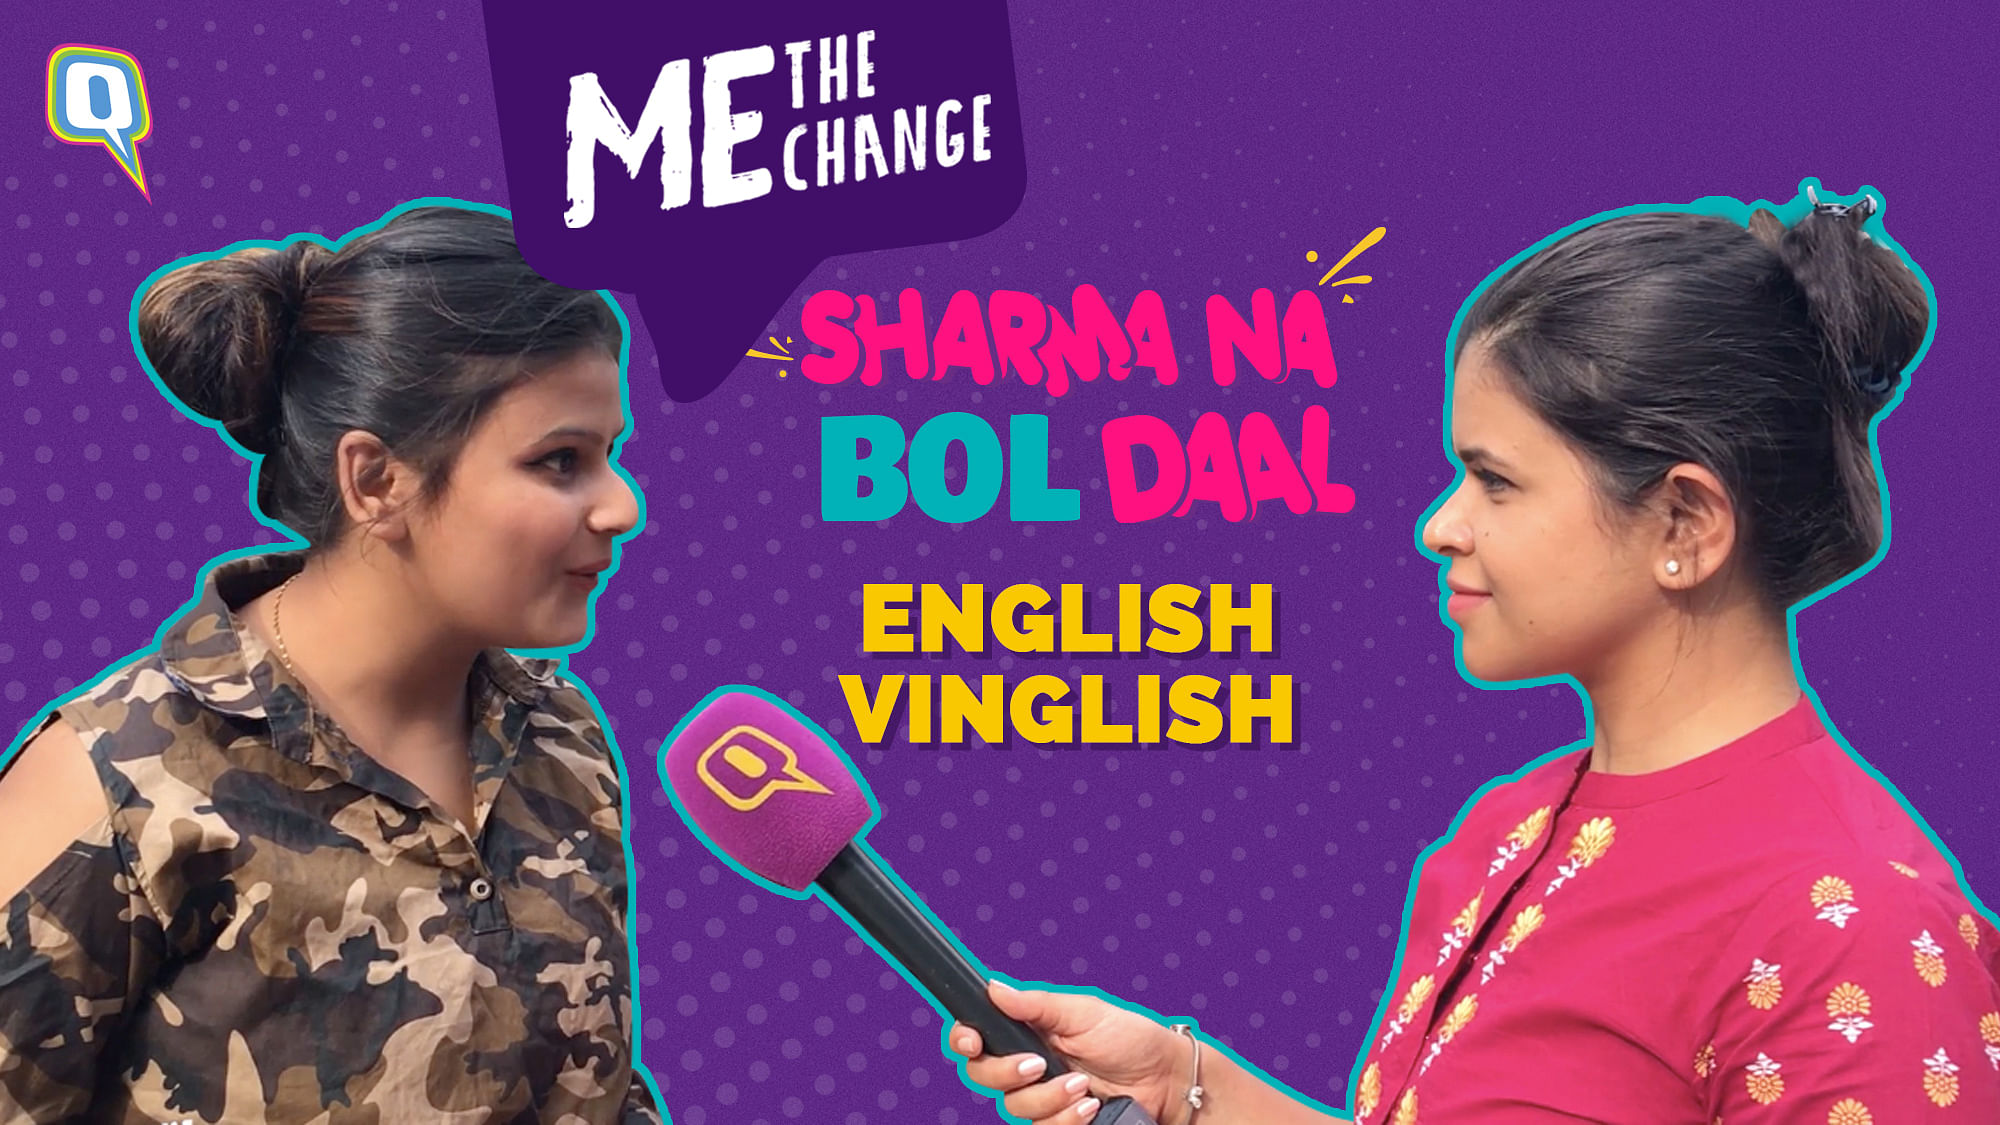 India is the world’s second-largest English-speaking country. But what’s the actual reason behind learning English?&nbsp;